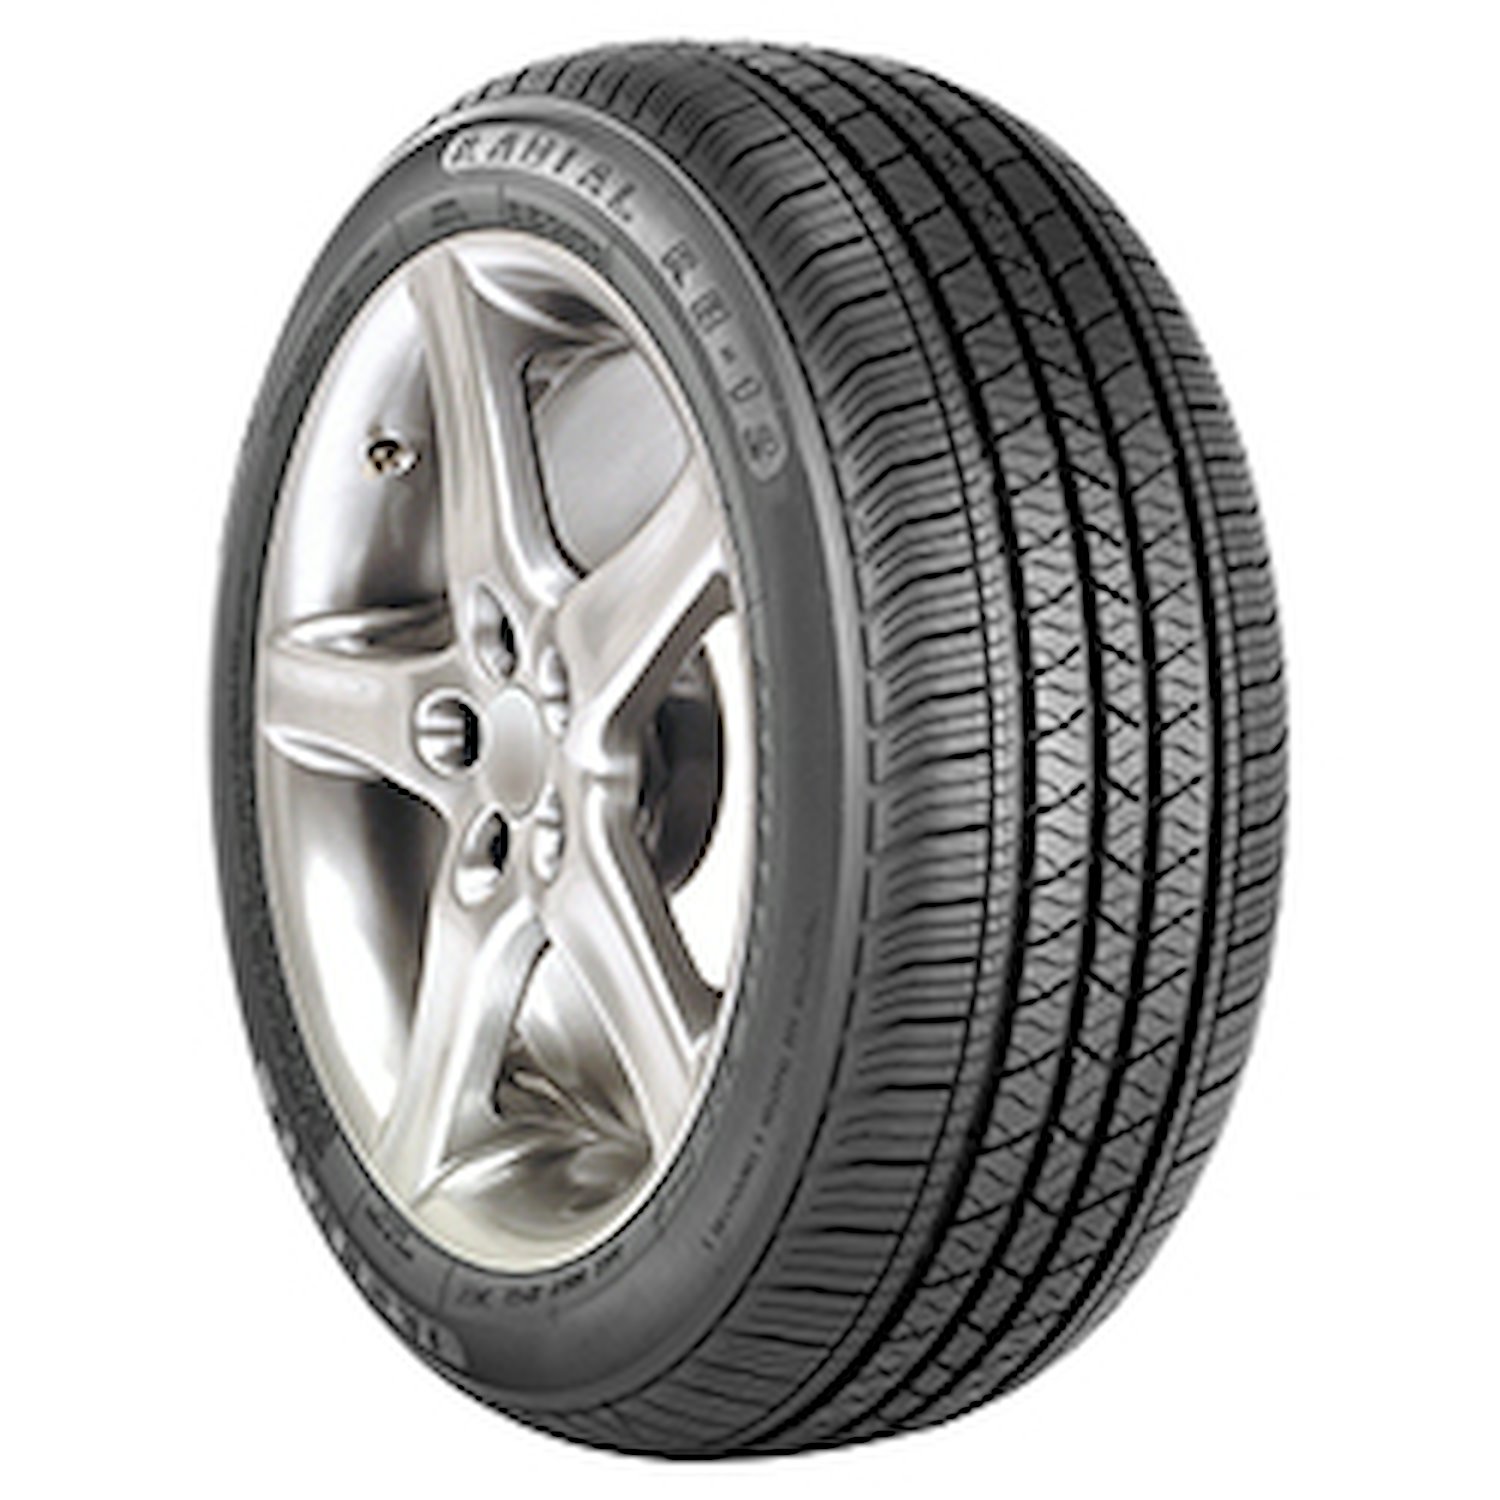 RB-12 Tire, 175/70R13 82T